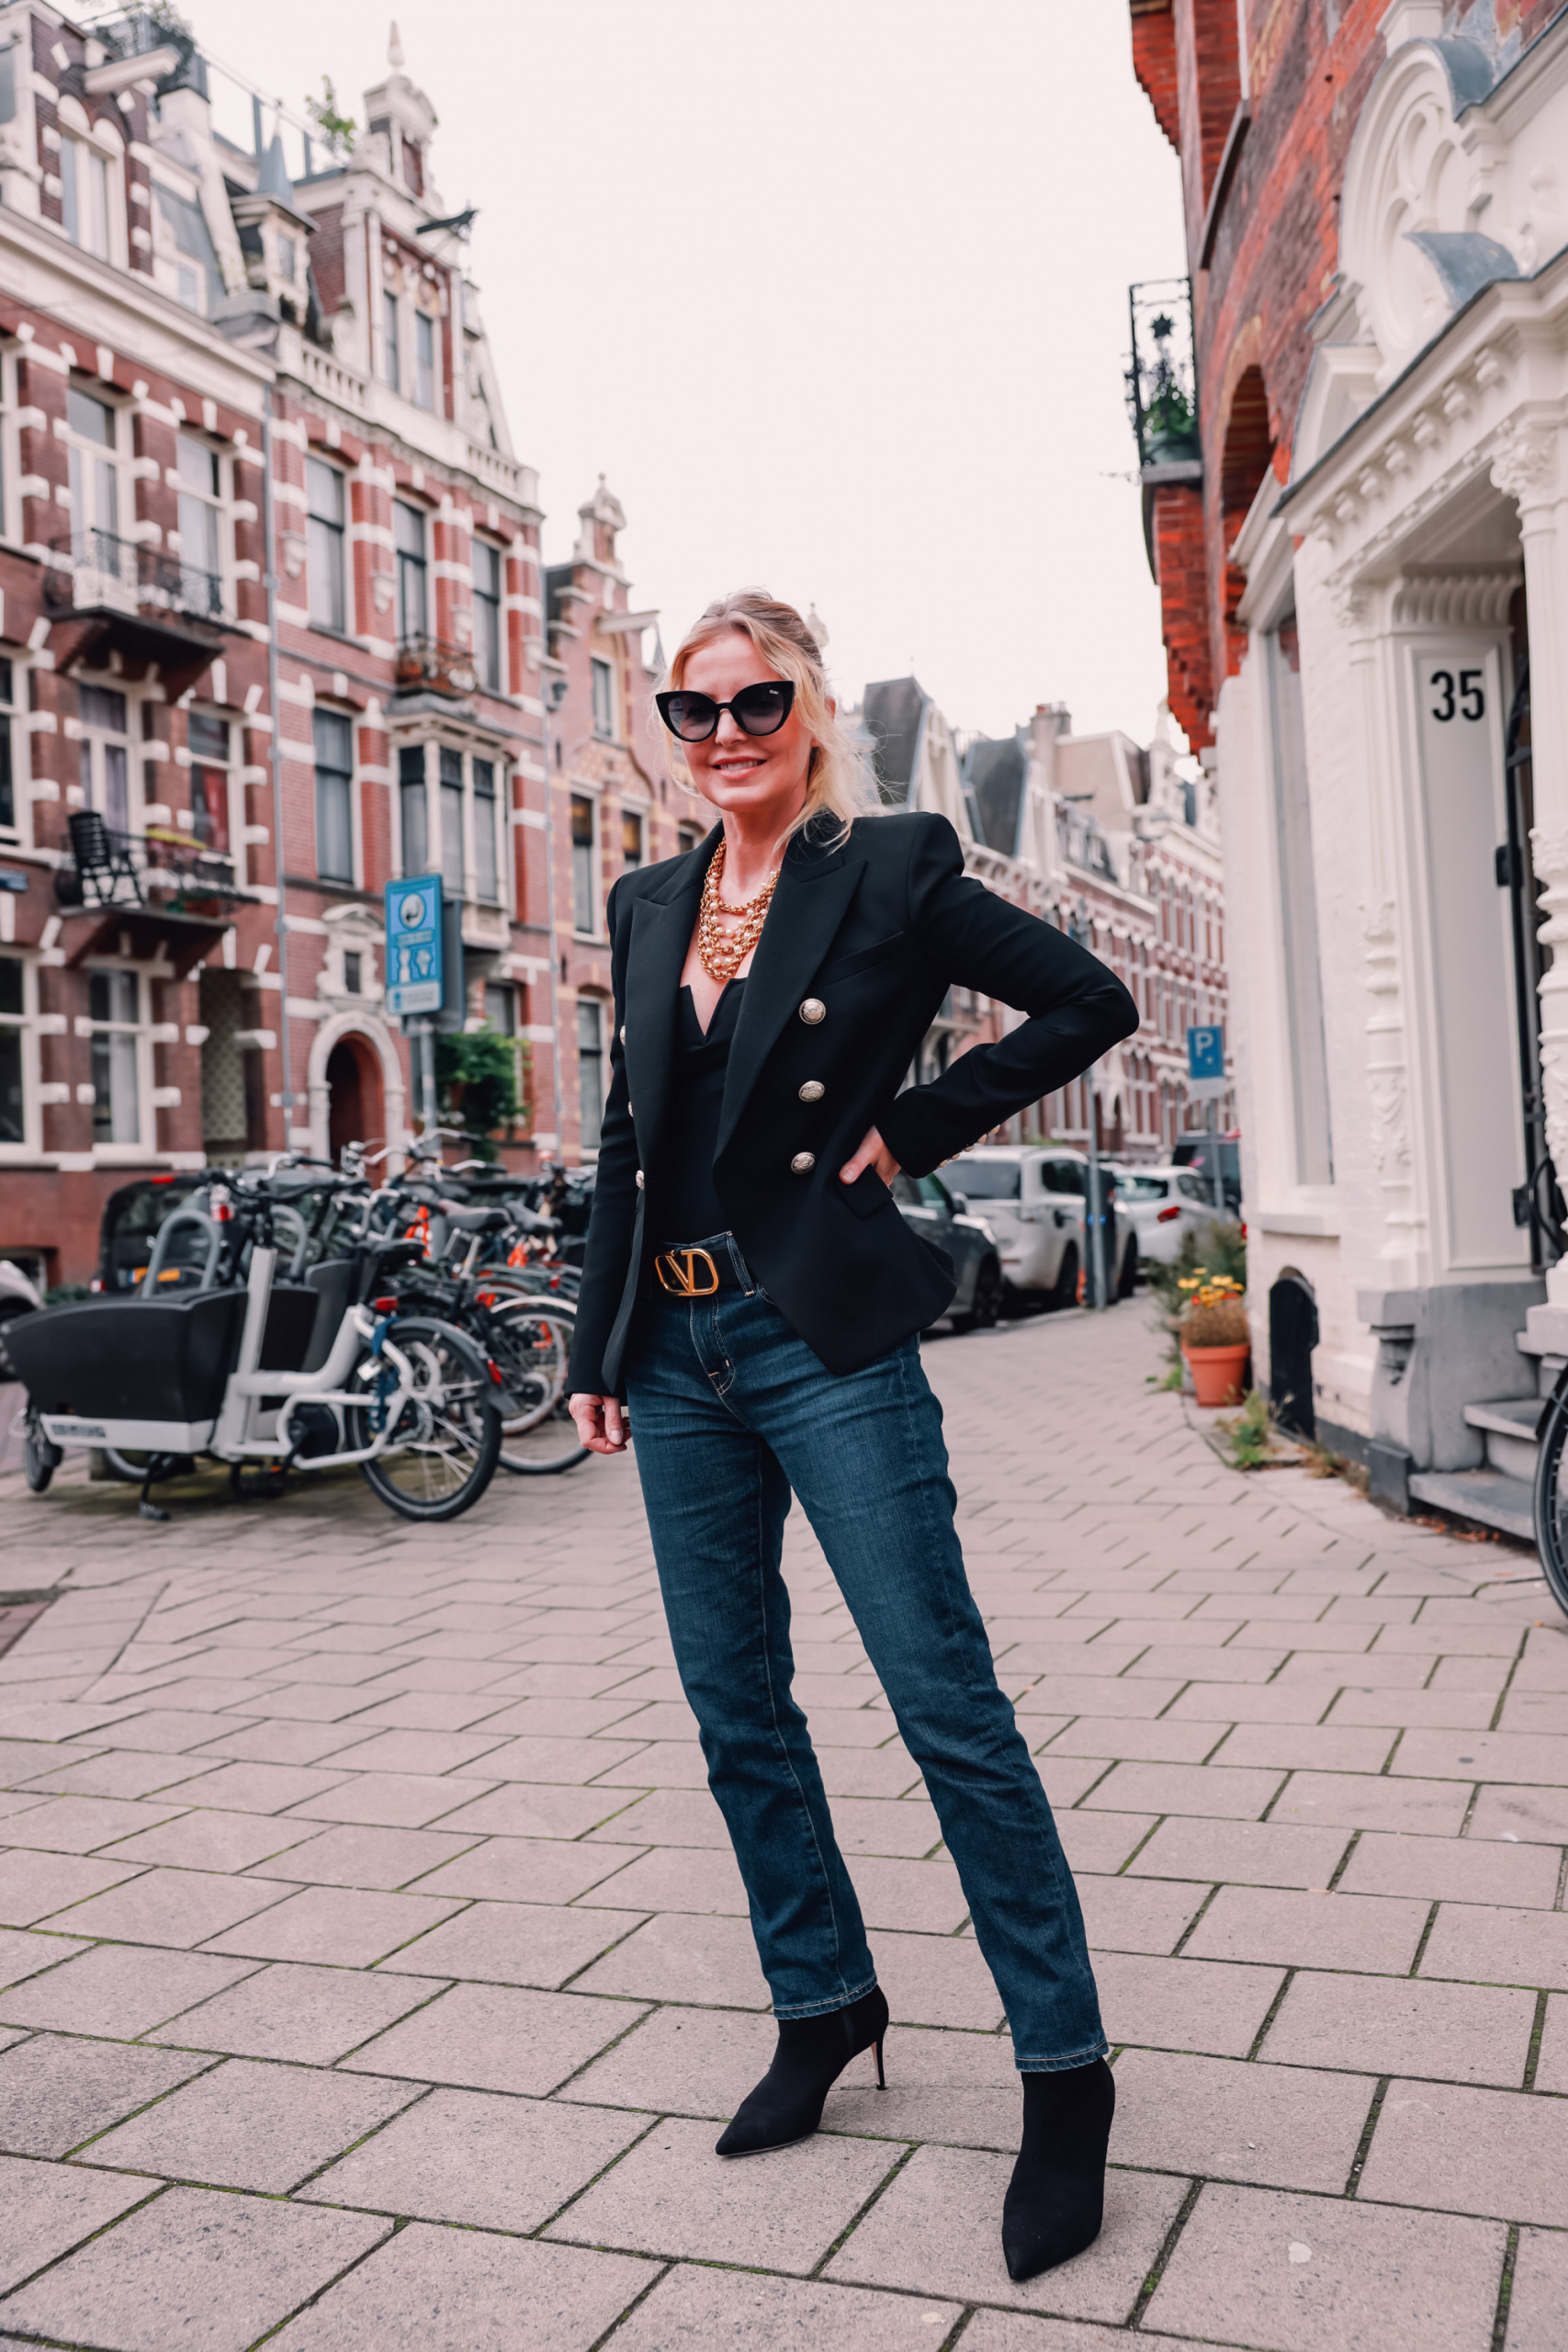 relaxed fit jeans by AG on fashion blogger over 40 Erin Busbee of Busbee STyle in Amsterdam Holland